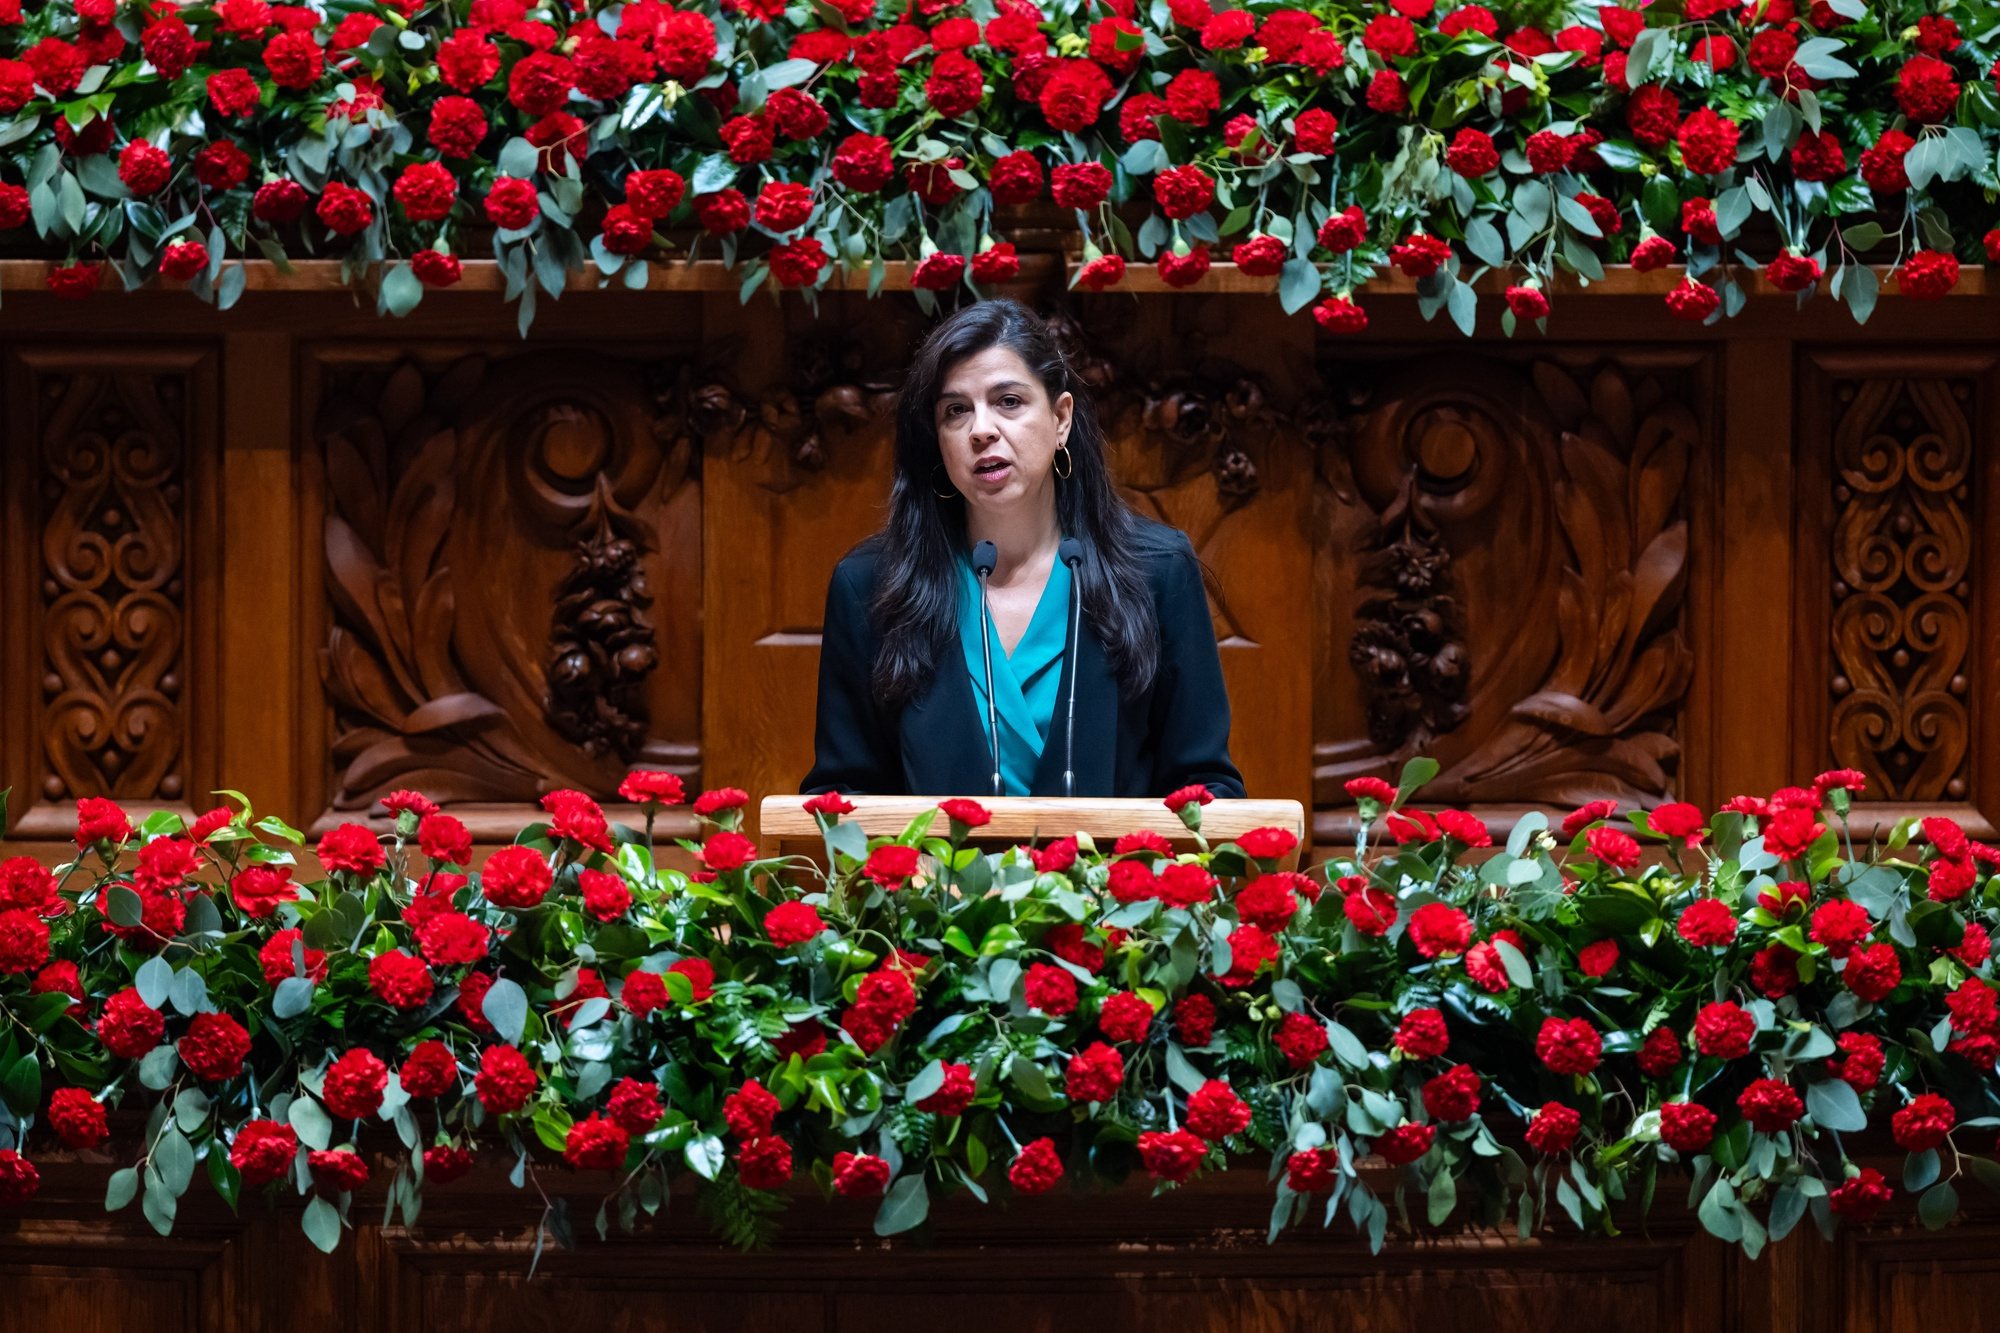 PAN (People, Animals and Nature) Party leader, Ines Sousa Real, delivers a speech during the solemn comemorative session at the Portuguese parliament in Lisbon, Portugal, 25 April 2024. Portugal celebrates the 50th anniversary of the Carnation Revolution that ended the authoritarian regime of Estado Novo (New State) that ruled the country between 1926 to 1974. JOSE SENA GOULAO/LUSA